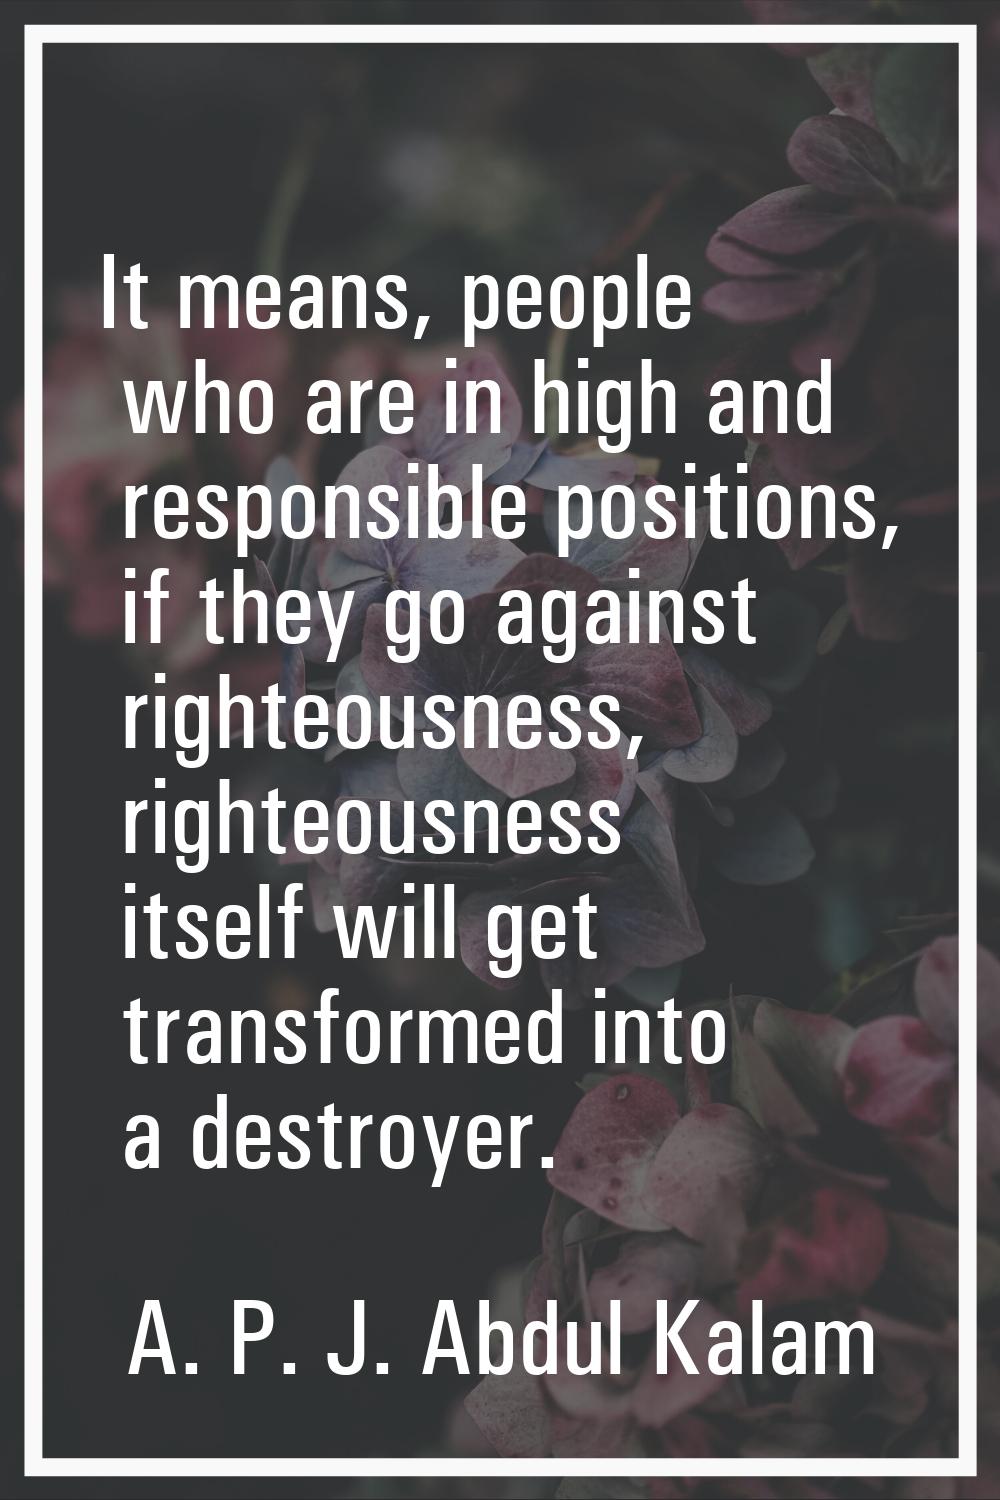 It means, people who are in high and responsible positions, if they go against righteousness, right